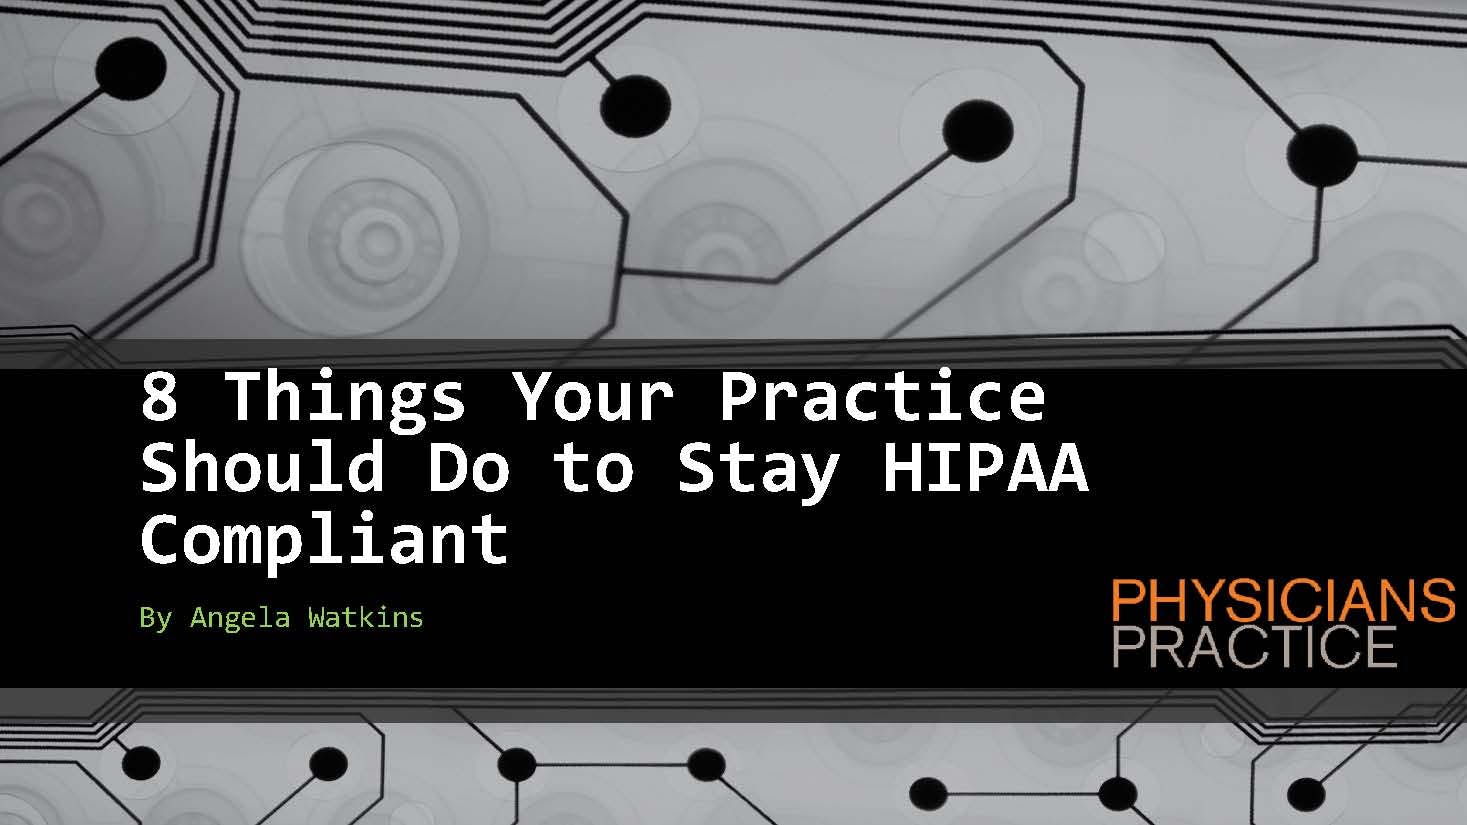 8 Things Your Practice Should Do to Stay HIPAA Compliant